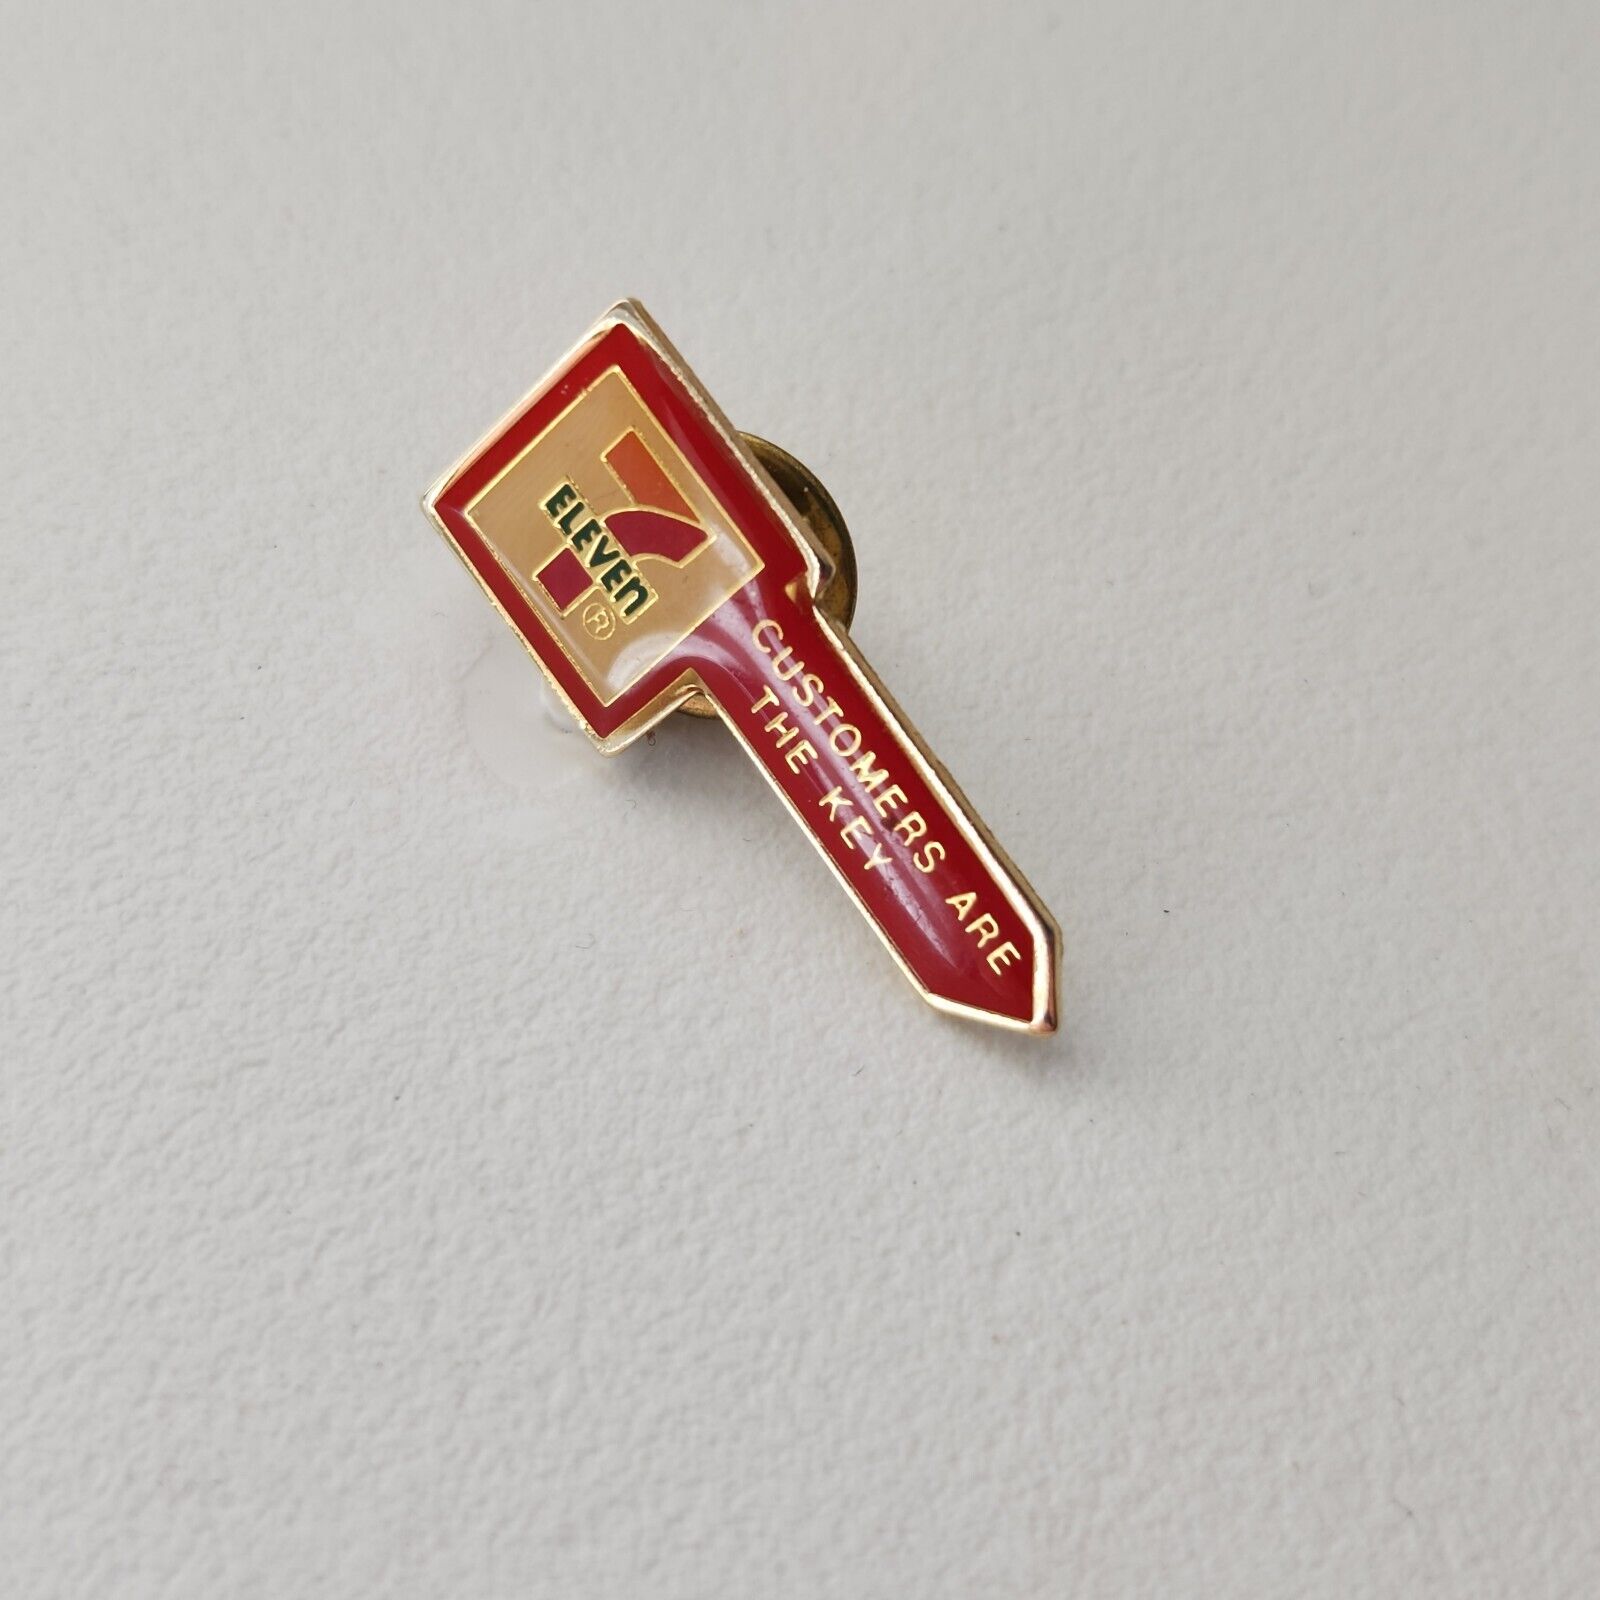 7 Eleven Customers are the Key Lapel Hat Pin 7-11 Vintage